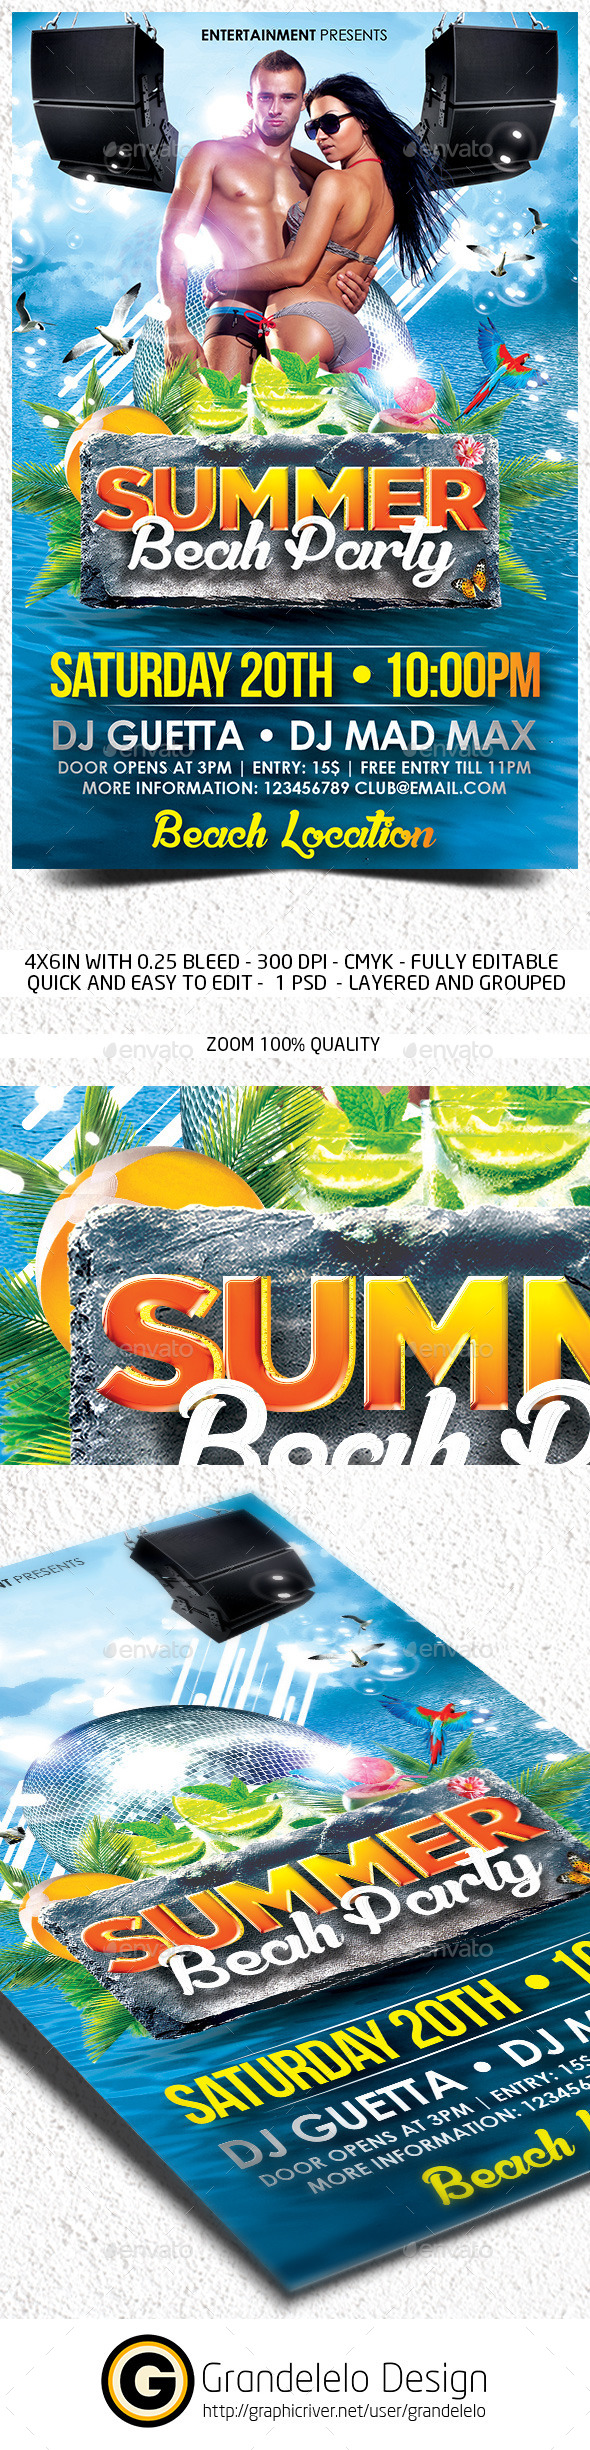 The Summer Beach Party Flyer Template